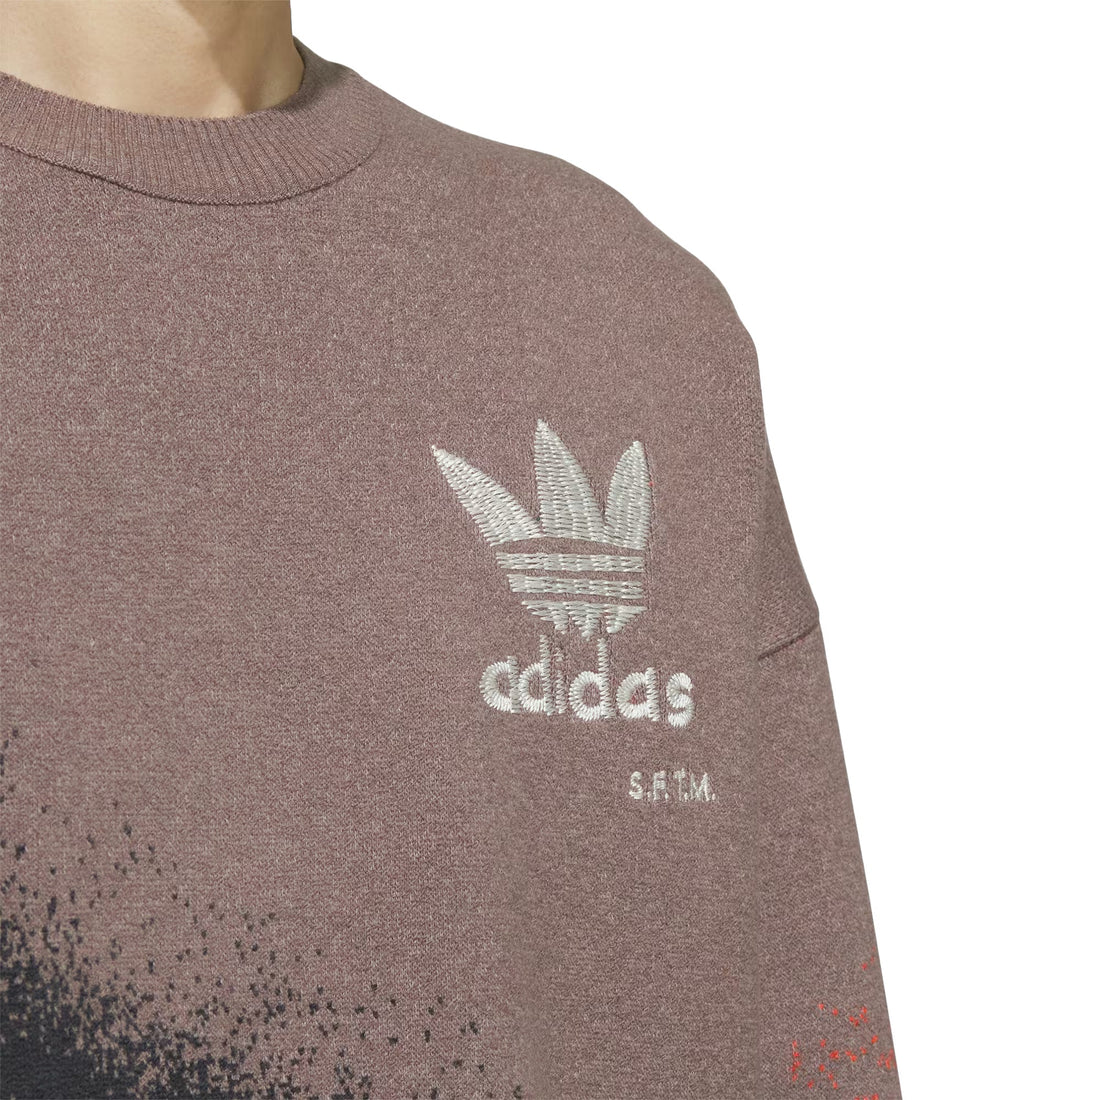 ADIDAS ORIGINALS X SONG FOR THE MUTE ALLOVER PRINT JACQUARD SWEATER (GENDER NEUTRAL)